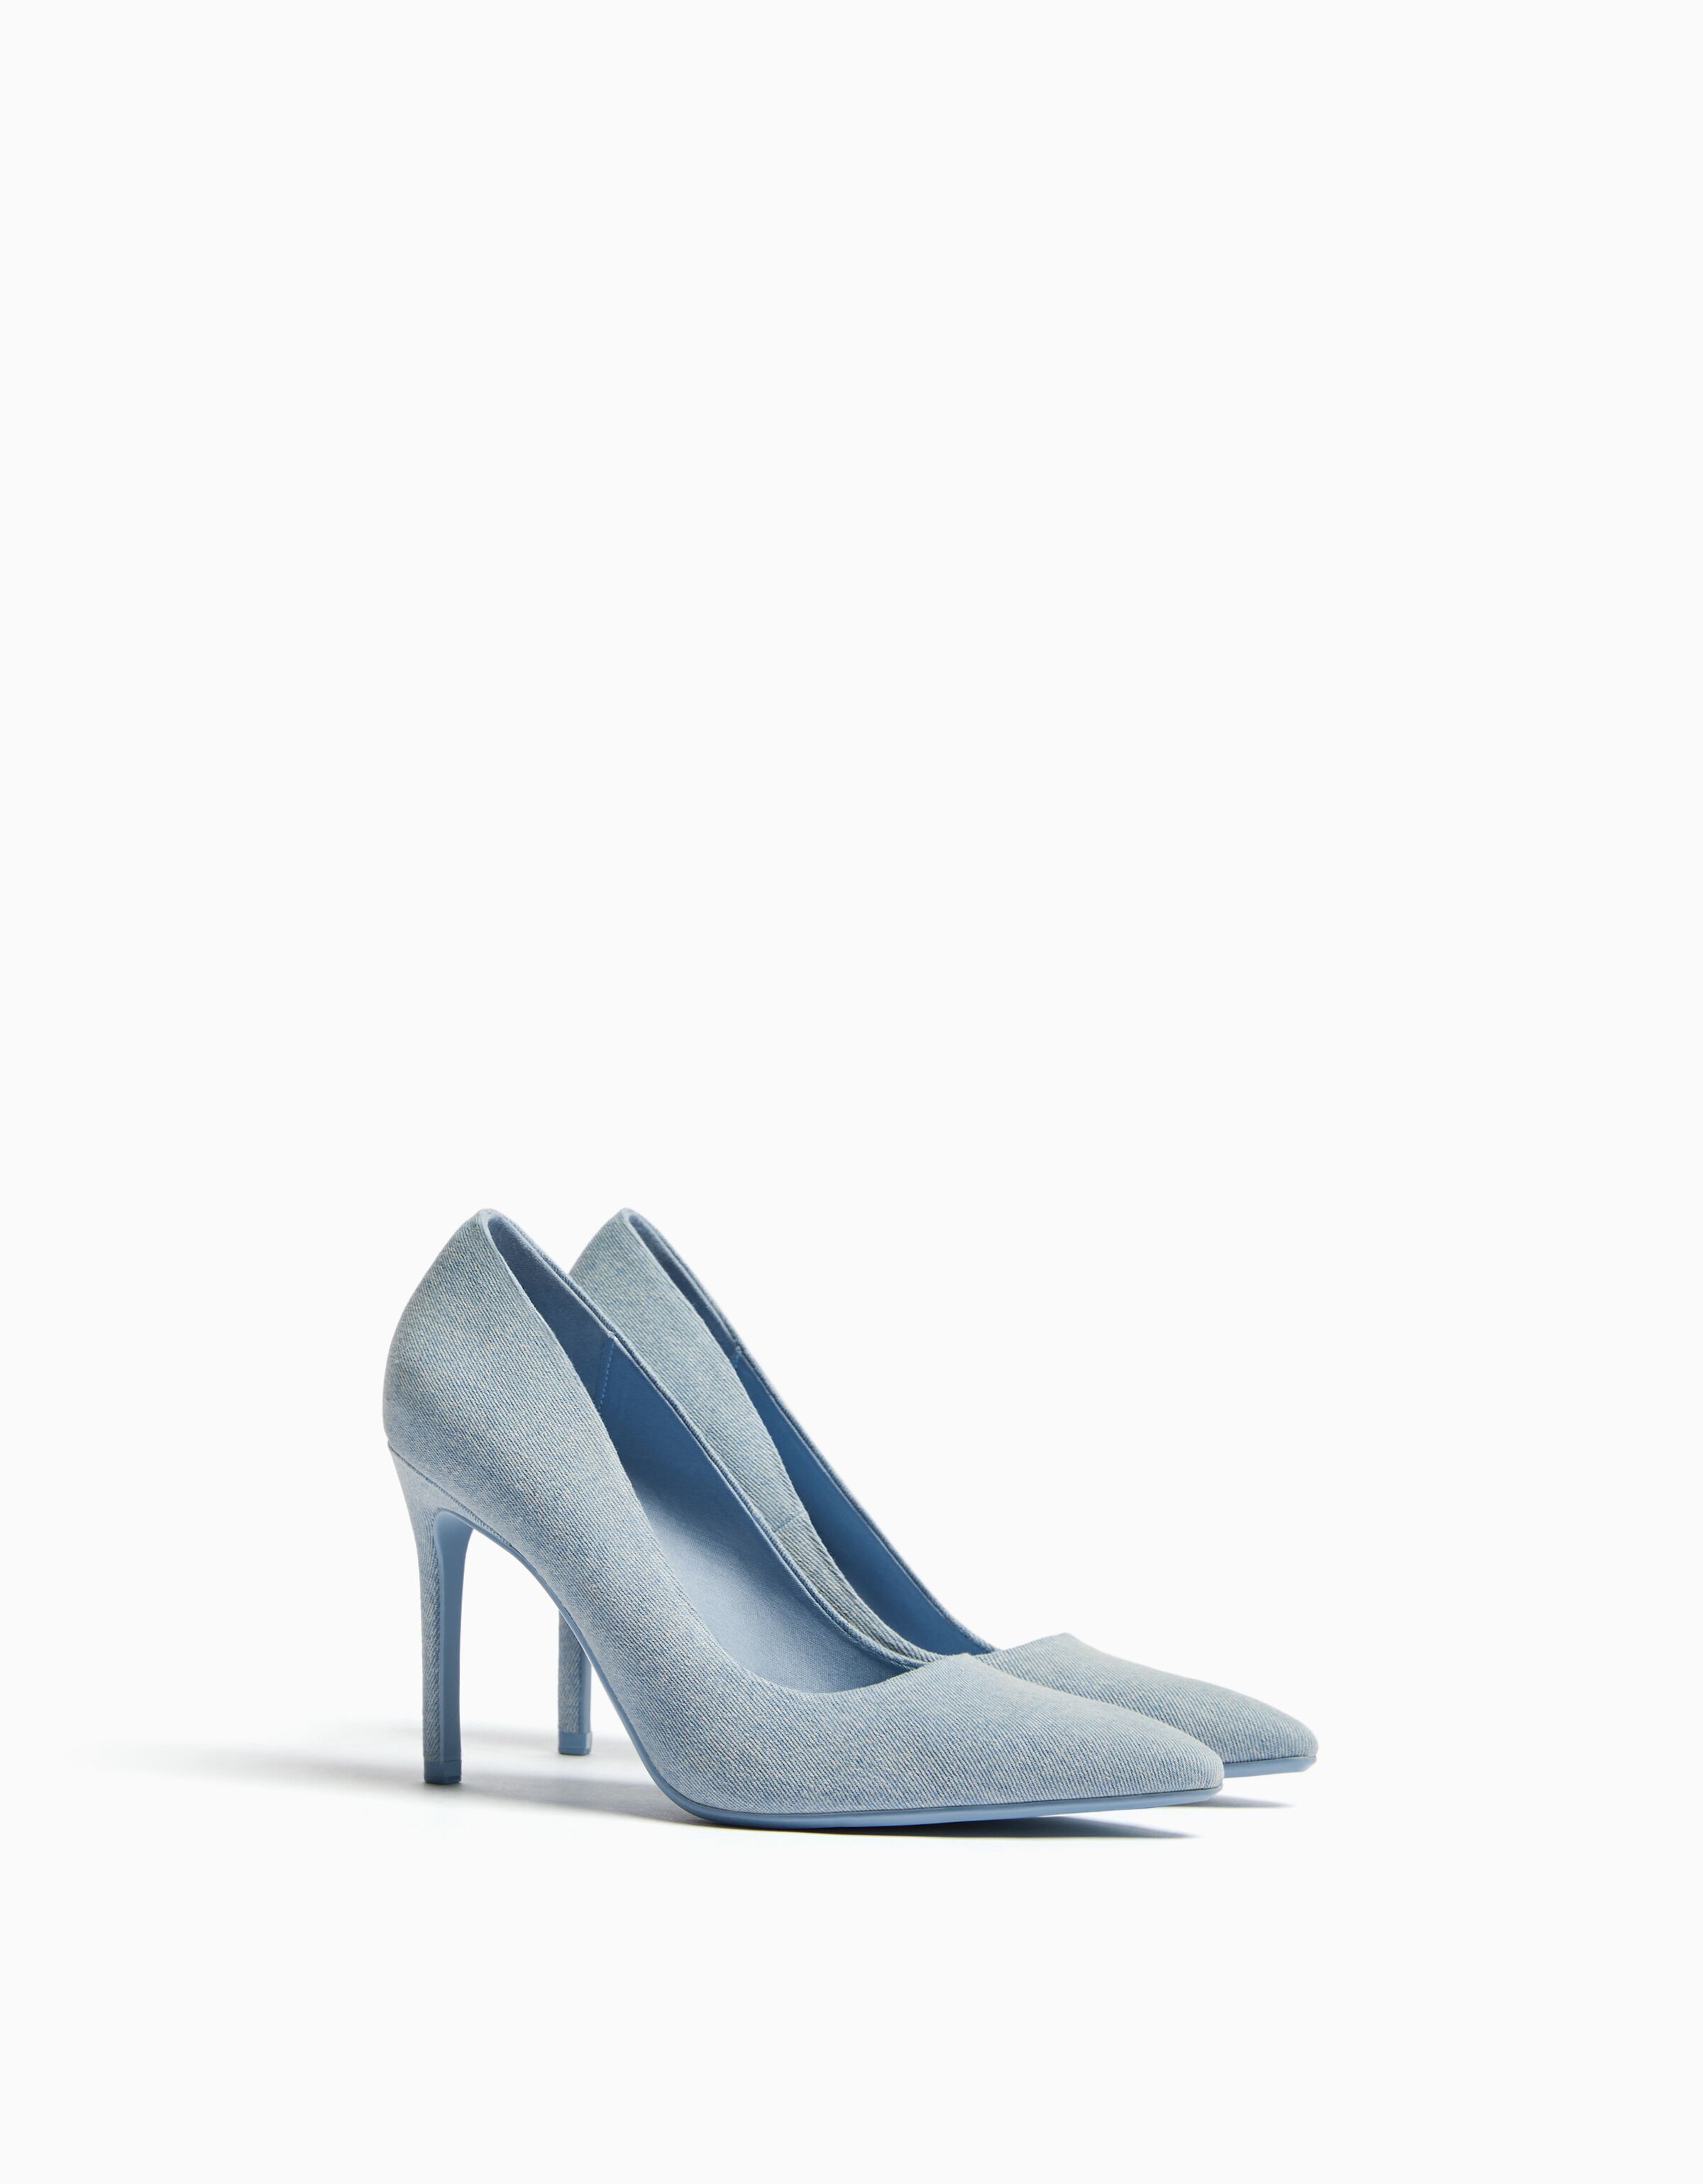 Blue Denim Closed Pointed Toe Ankle Strappy Pumps With Stiletto Heels